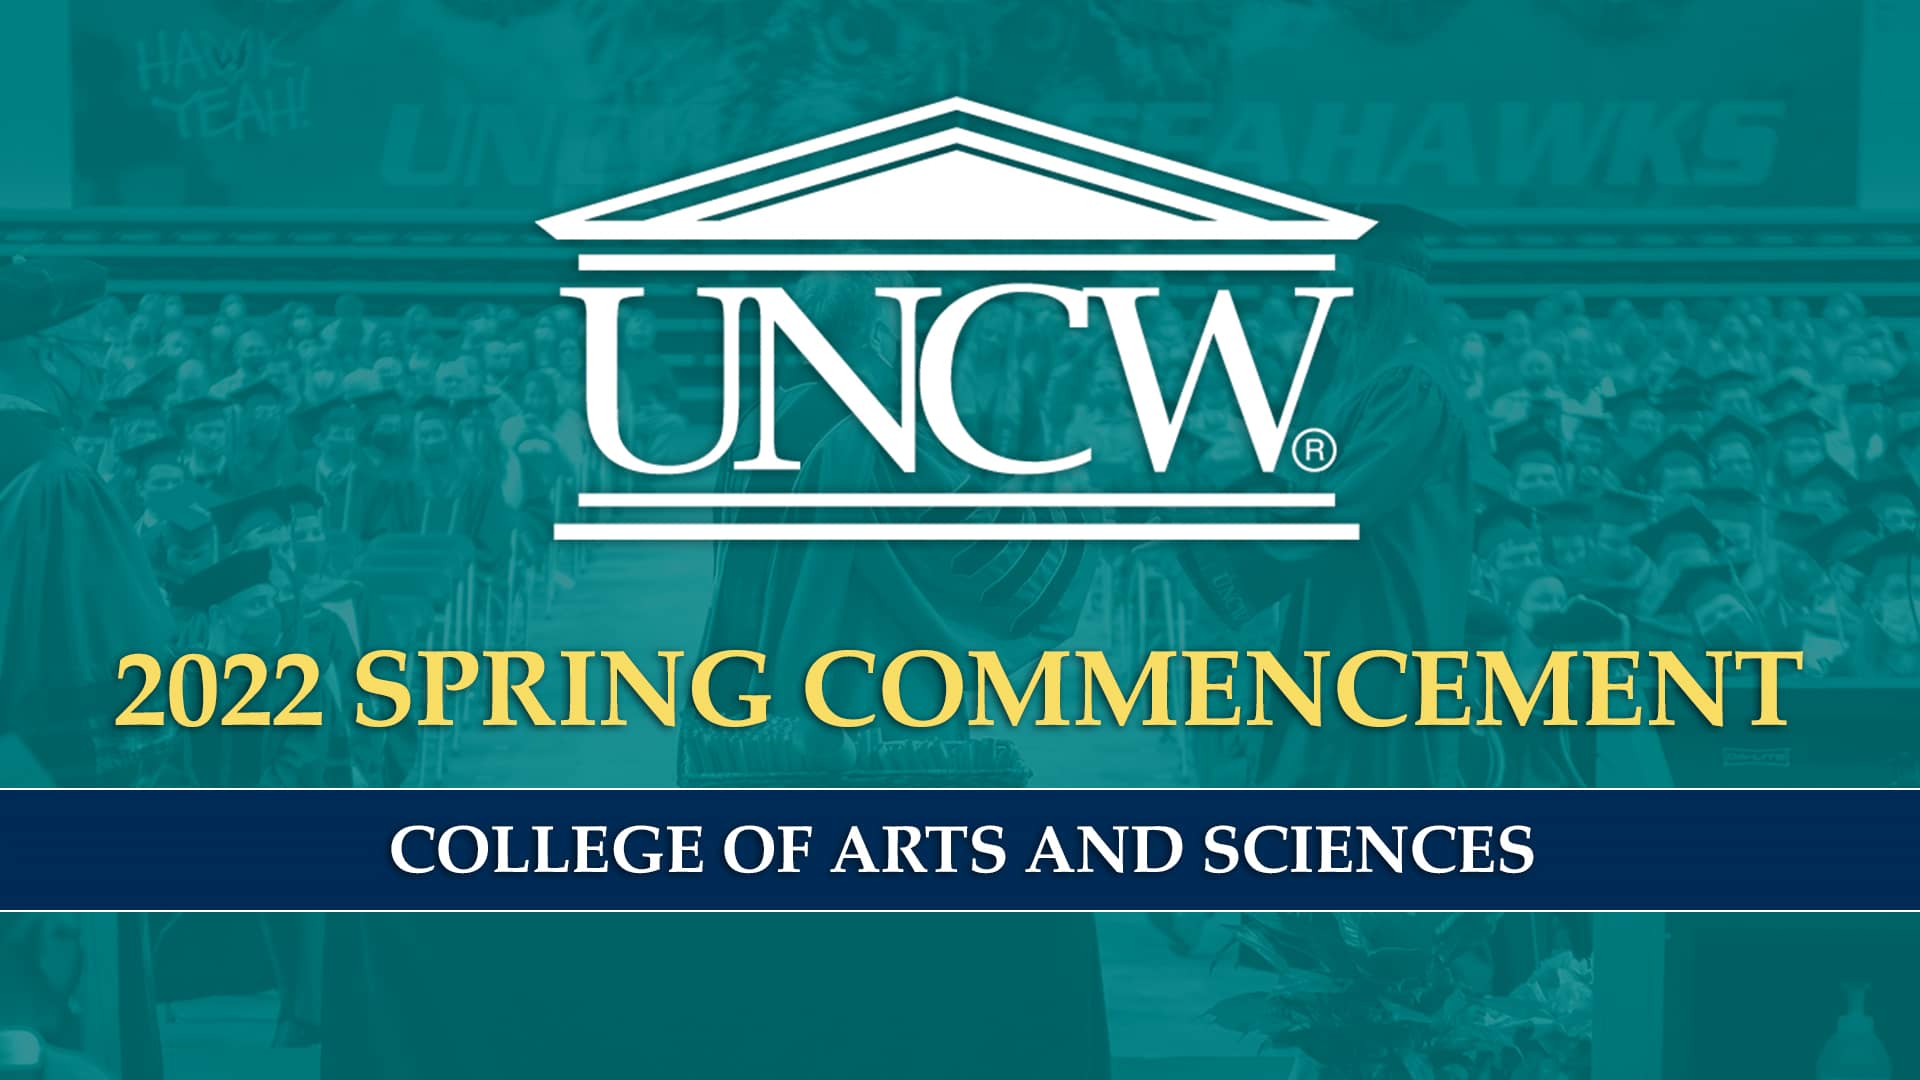 UNCW Spring 2022 Commencement College of Arts and Sciences Friday